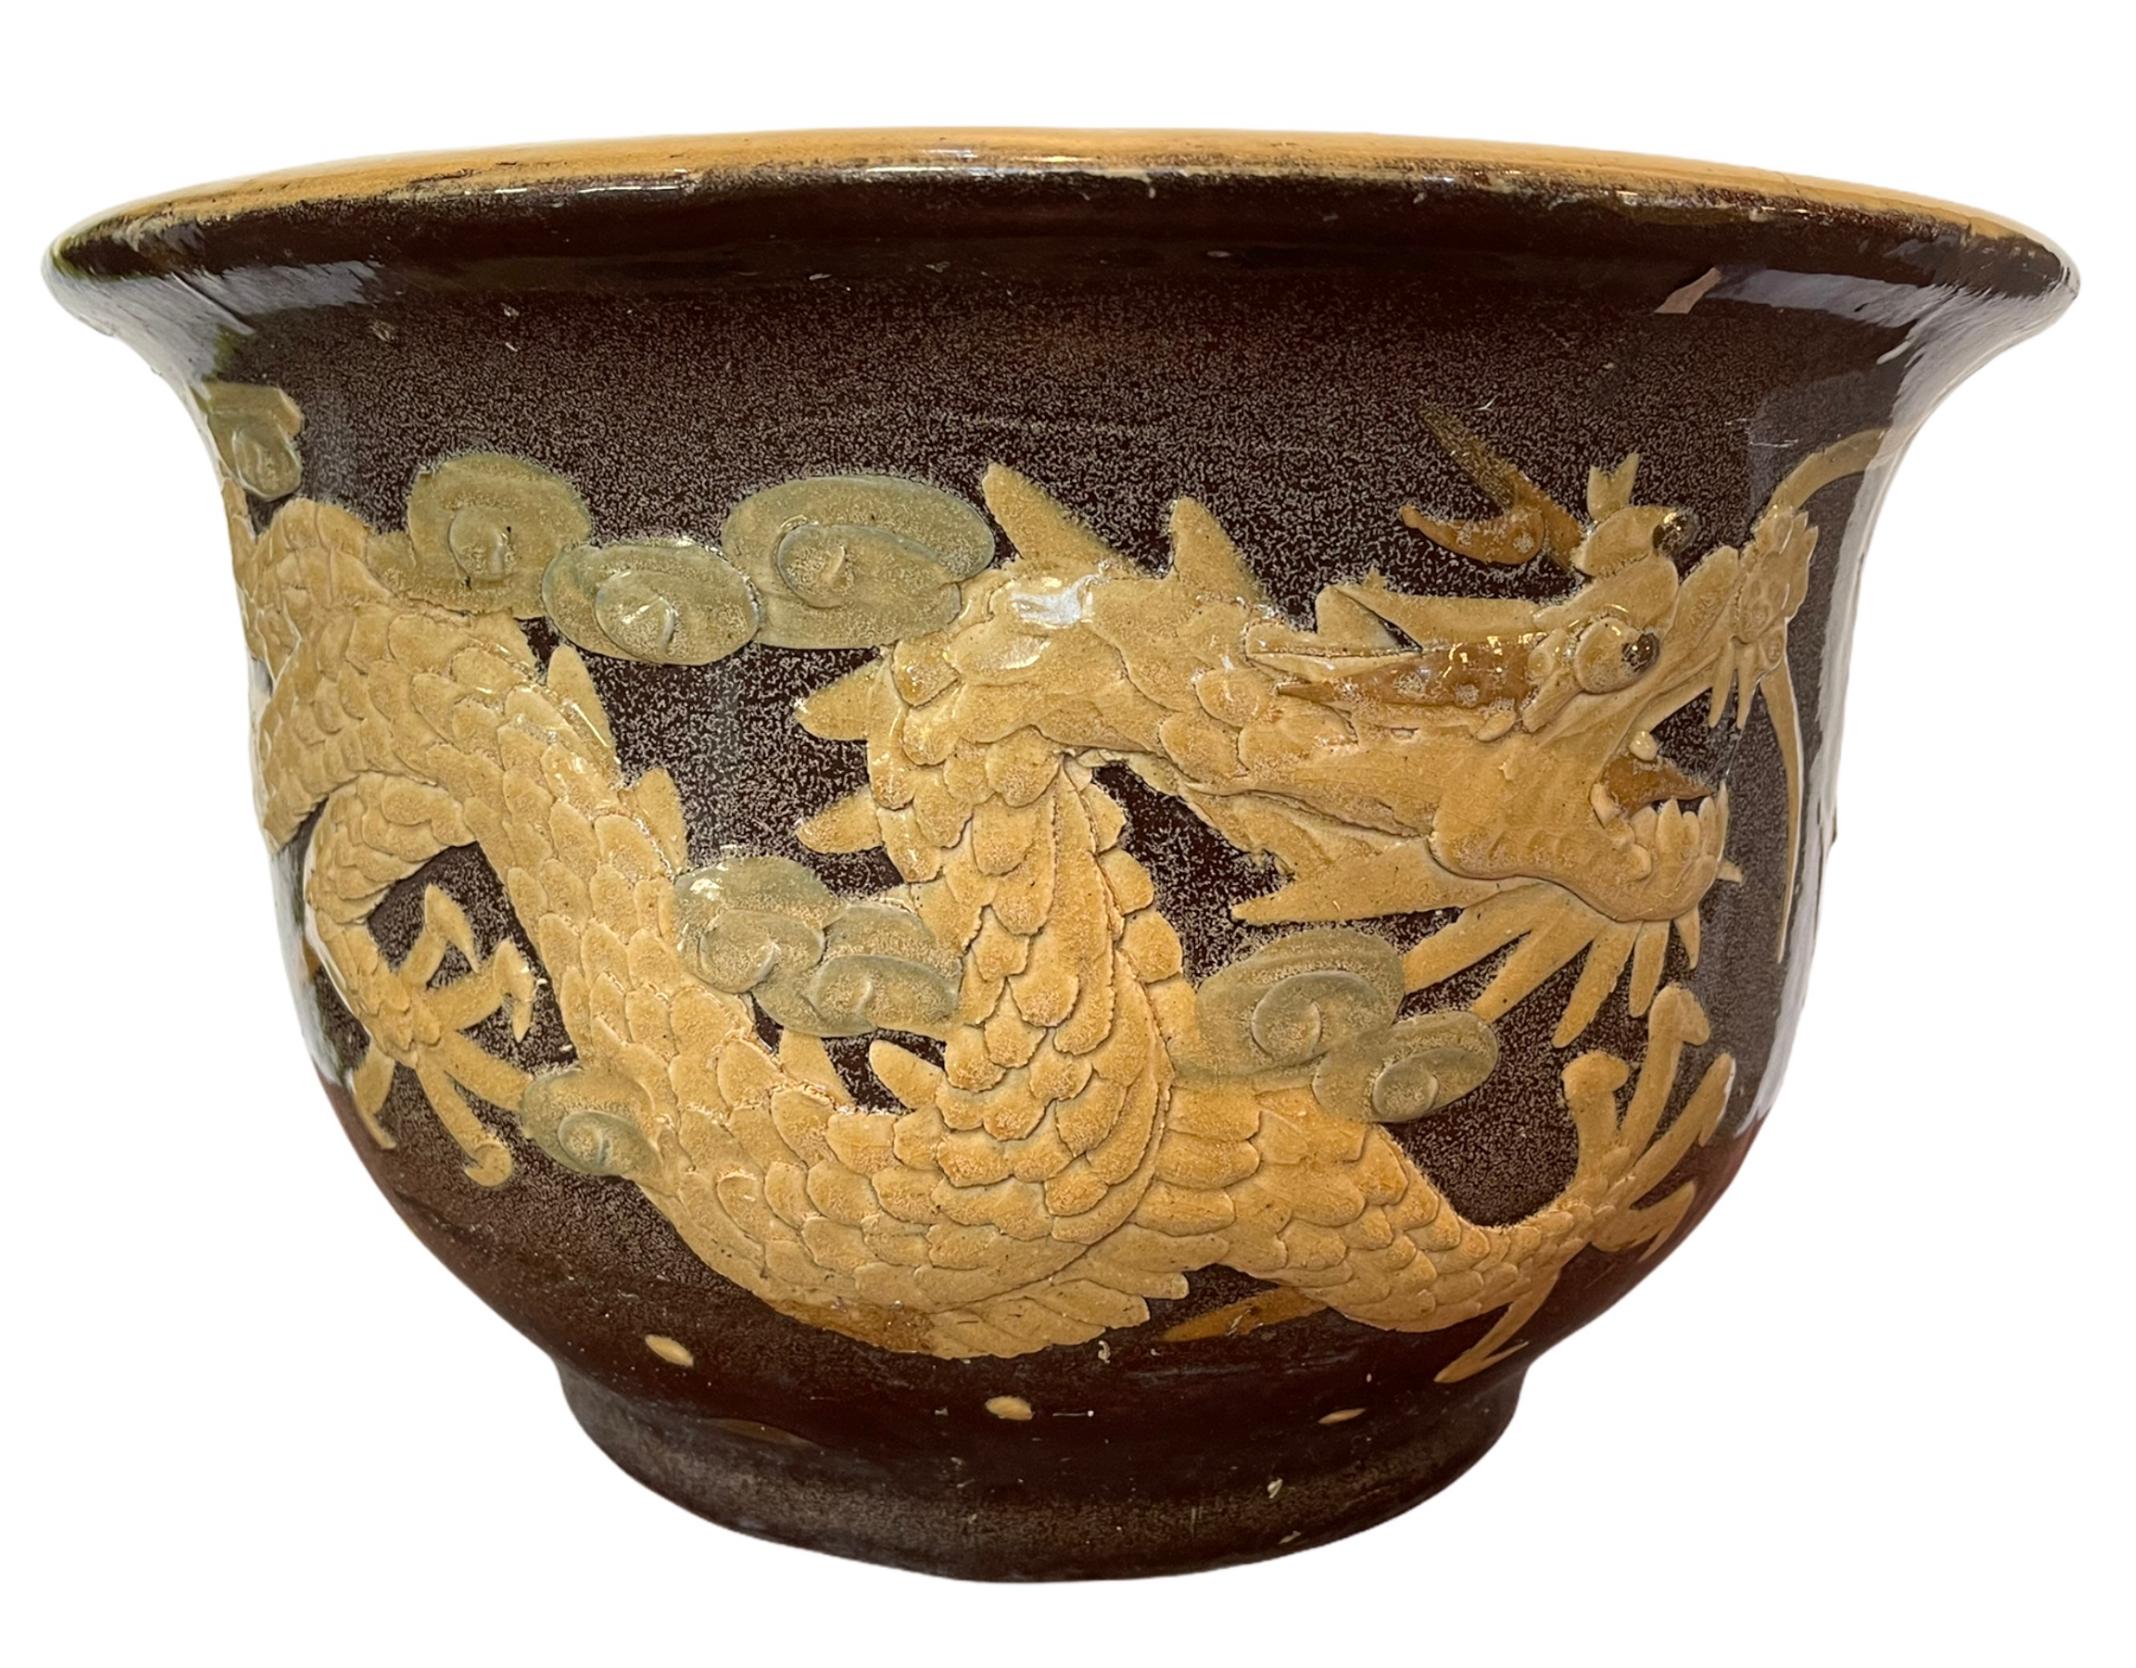 Late 19th century black egg Chinese art pottery pot featuring an Asian dragon along the front. These Pots over a 120 years were used for the storage of black 